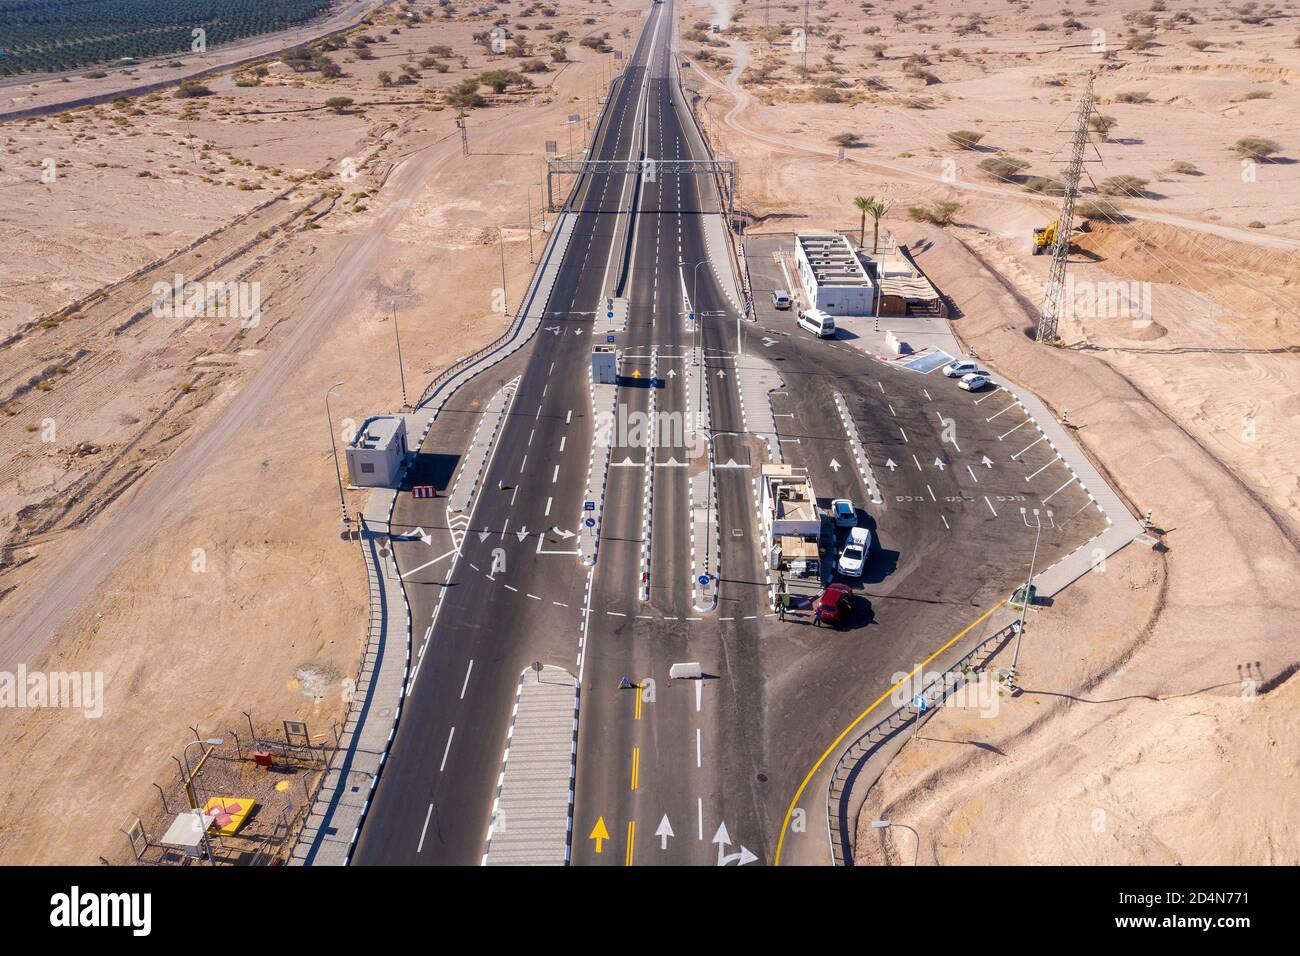 Eilat free trade zone customs checkpoint with traffic approaching, Aerial view Stock Photo